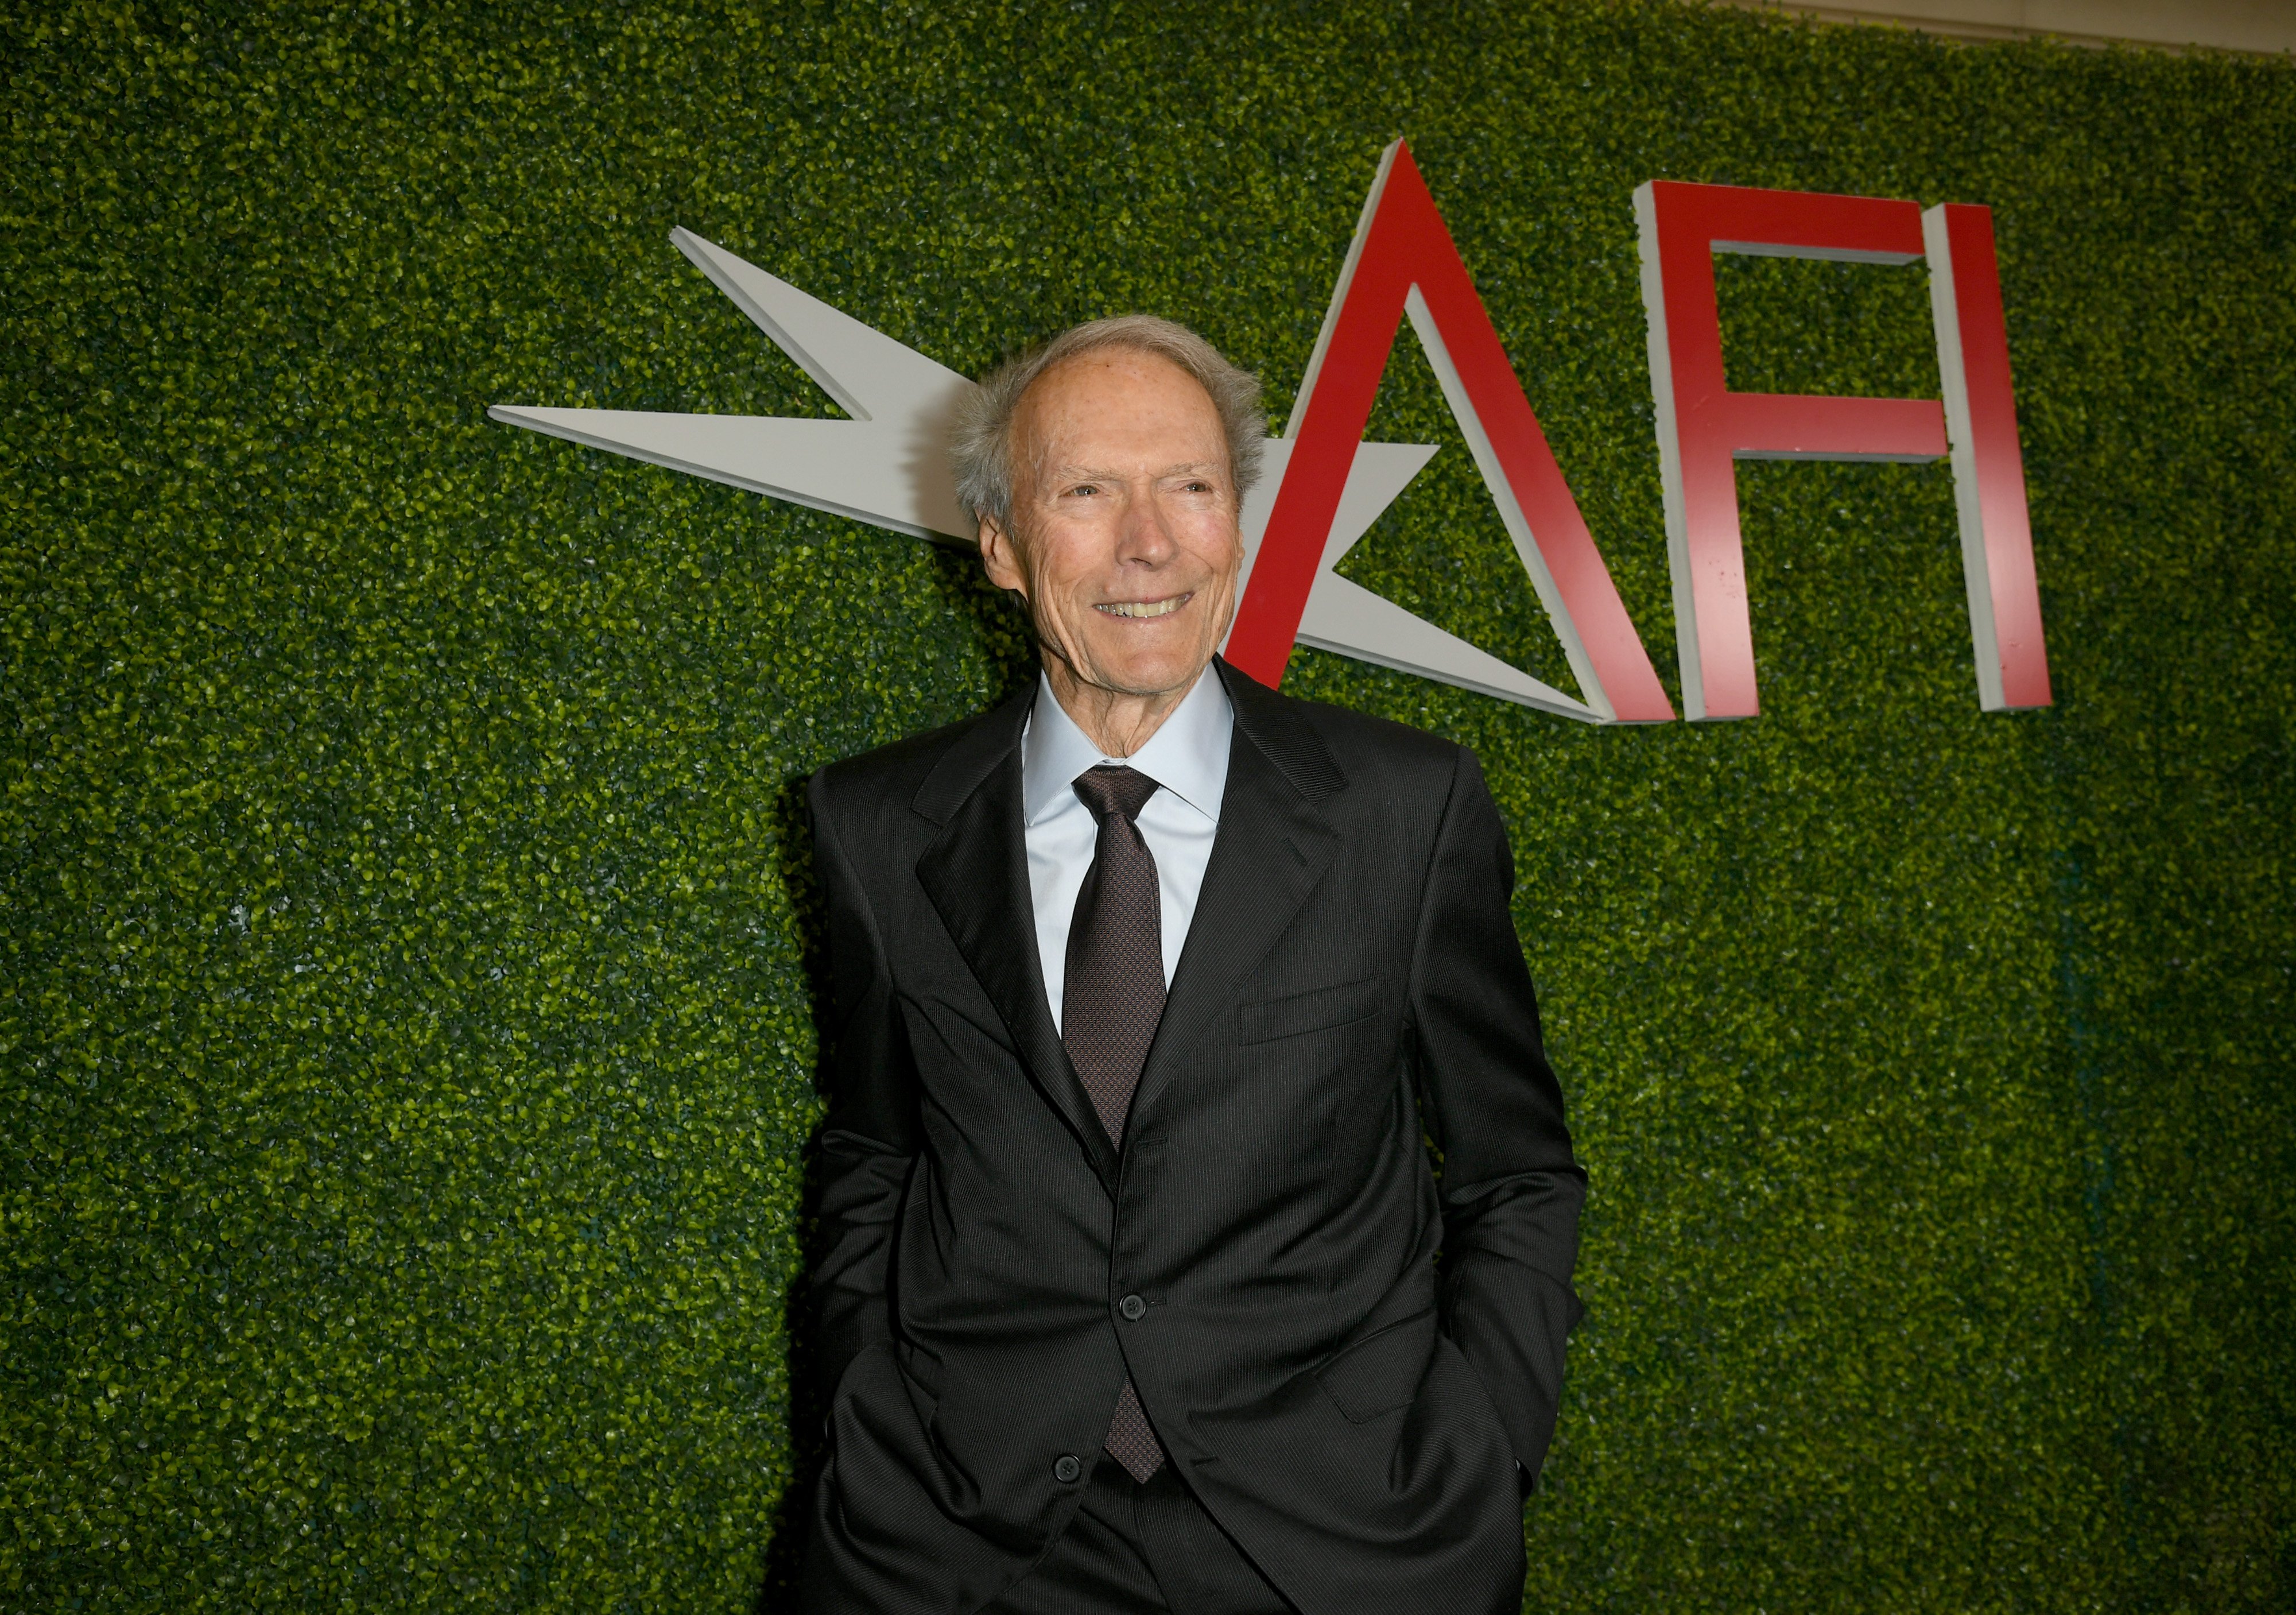 Clint Eastwood attends the 20th Annual AFI Awards at Four Seasons Hotel Los Angeles at Beverly Hills on January 3, 2020, in Los Angeles, California. | Source: Getty Images